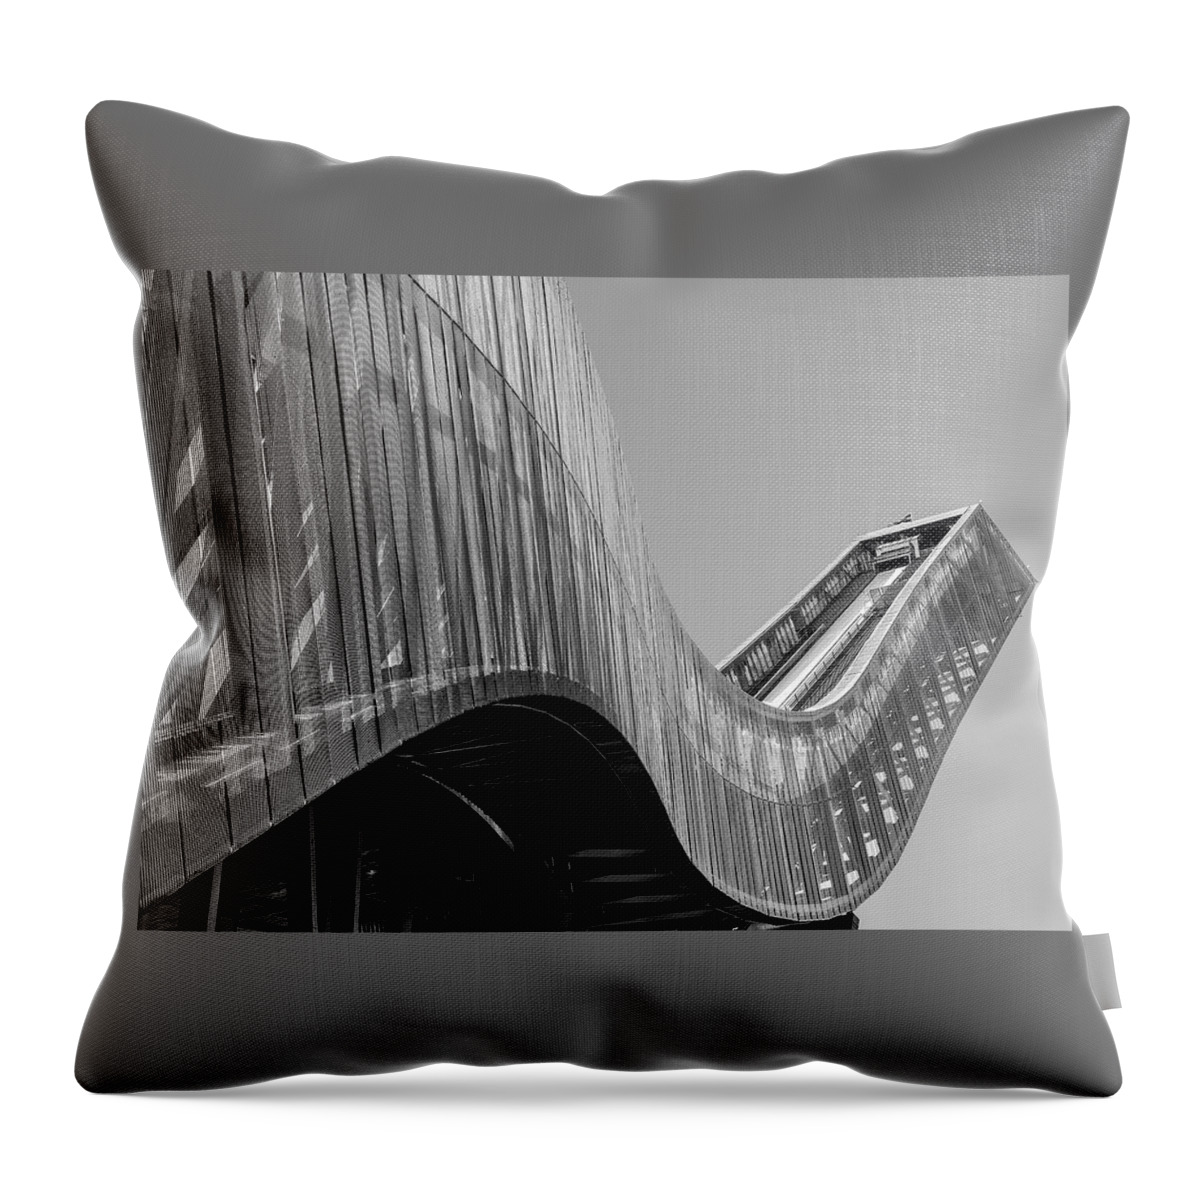 Norwary Throw Pillow featuring the photograph Holmenkollbakken Ski Jump Norway by Phil Cardamone